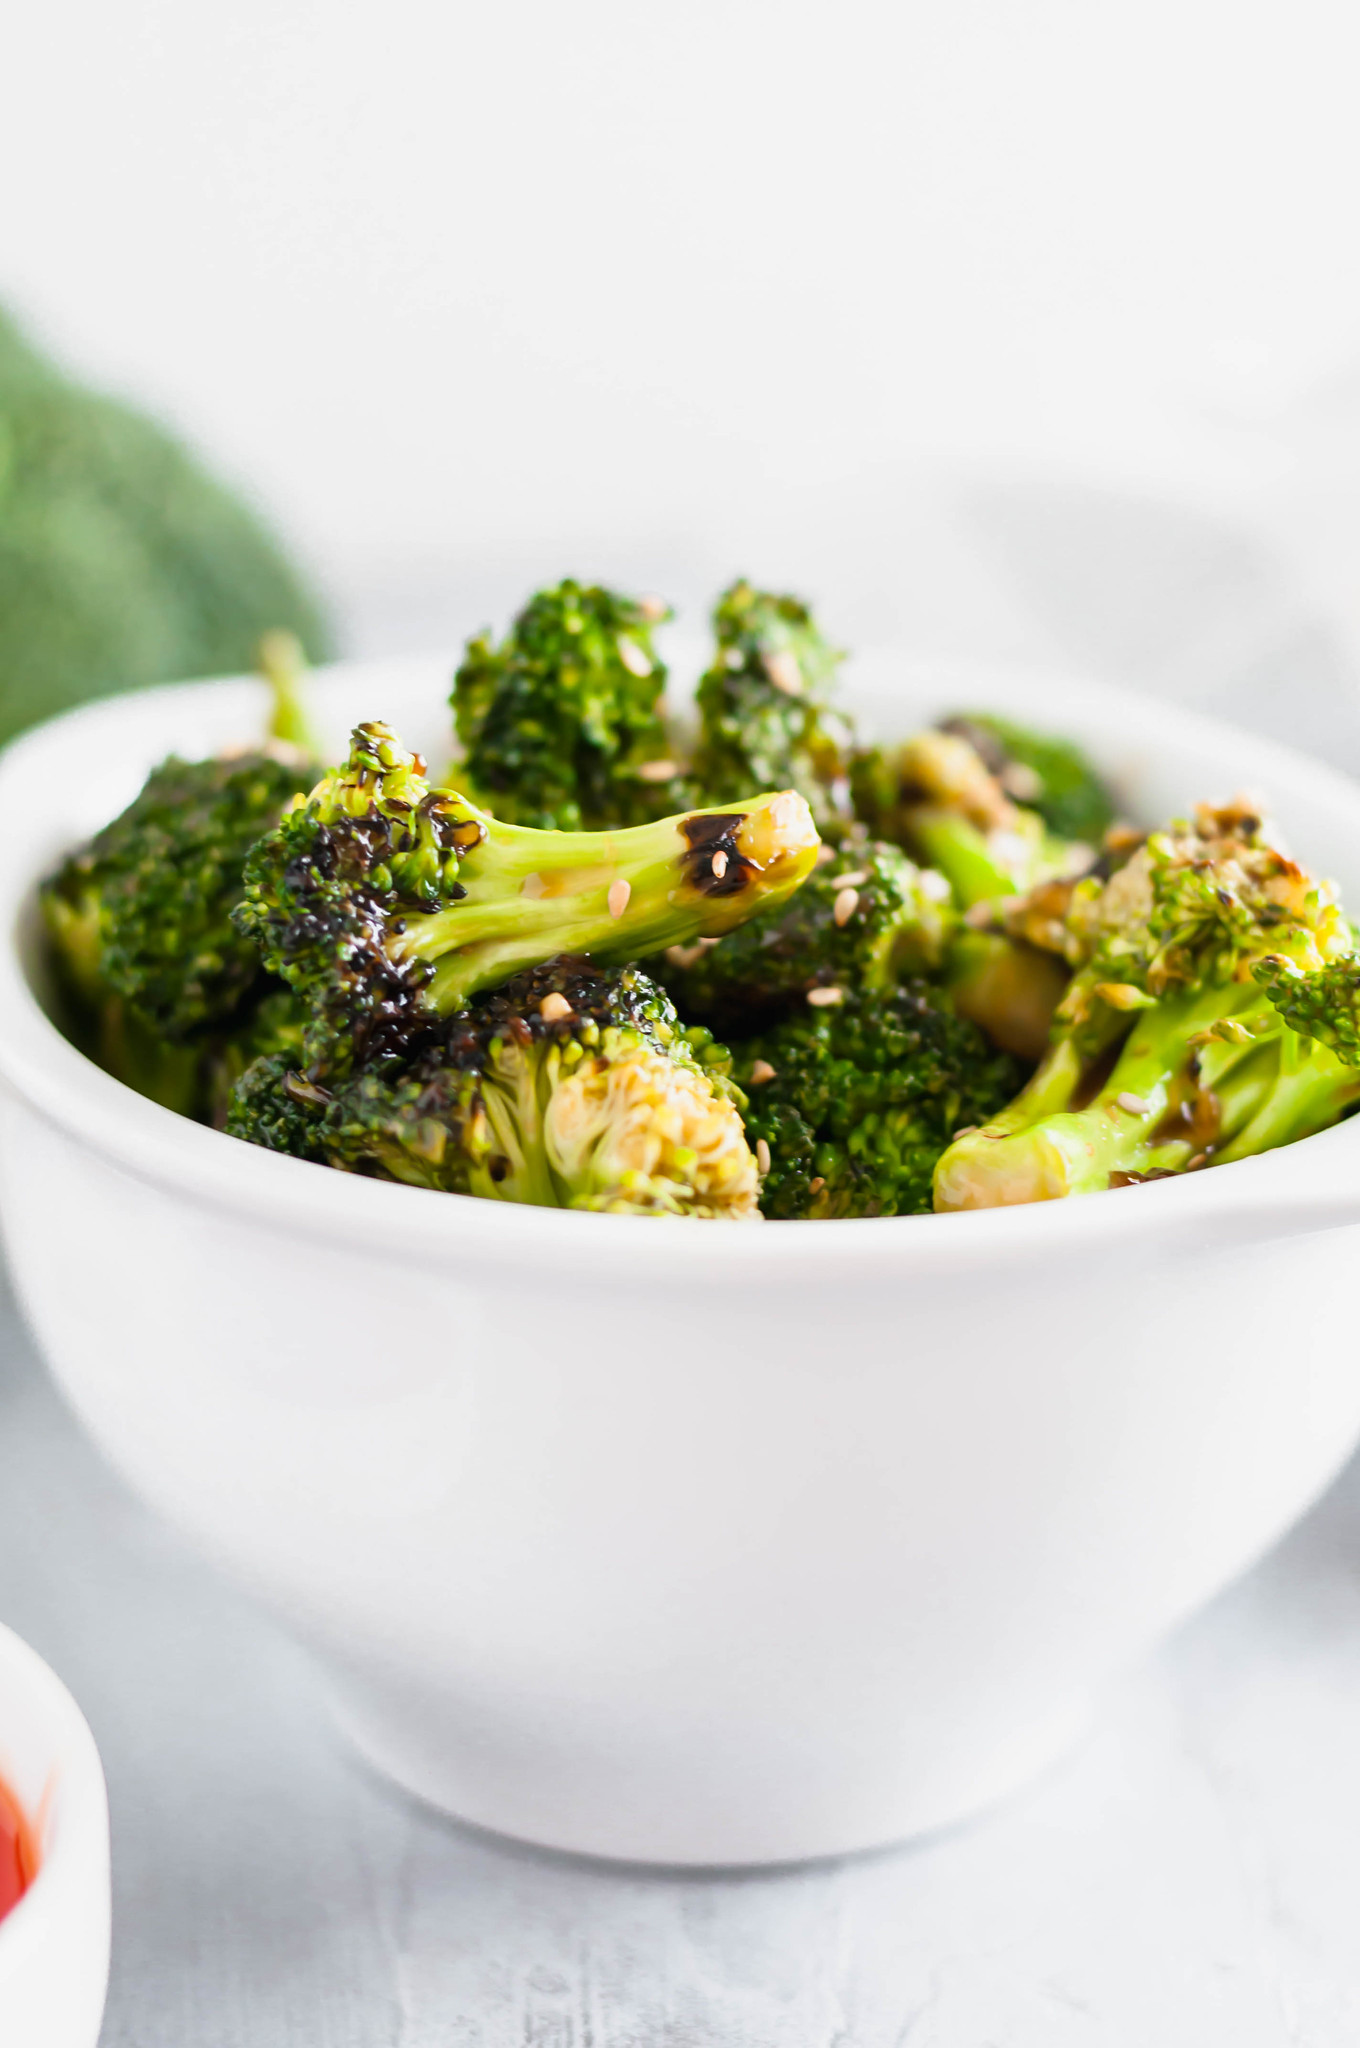 Looking for an easy, super flavorful side dish? This Thai Sweet Chili Broccoli is simple to throw together and super delicious.